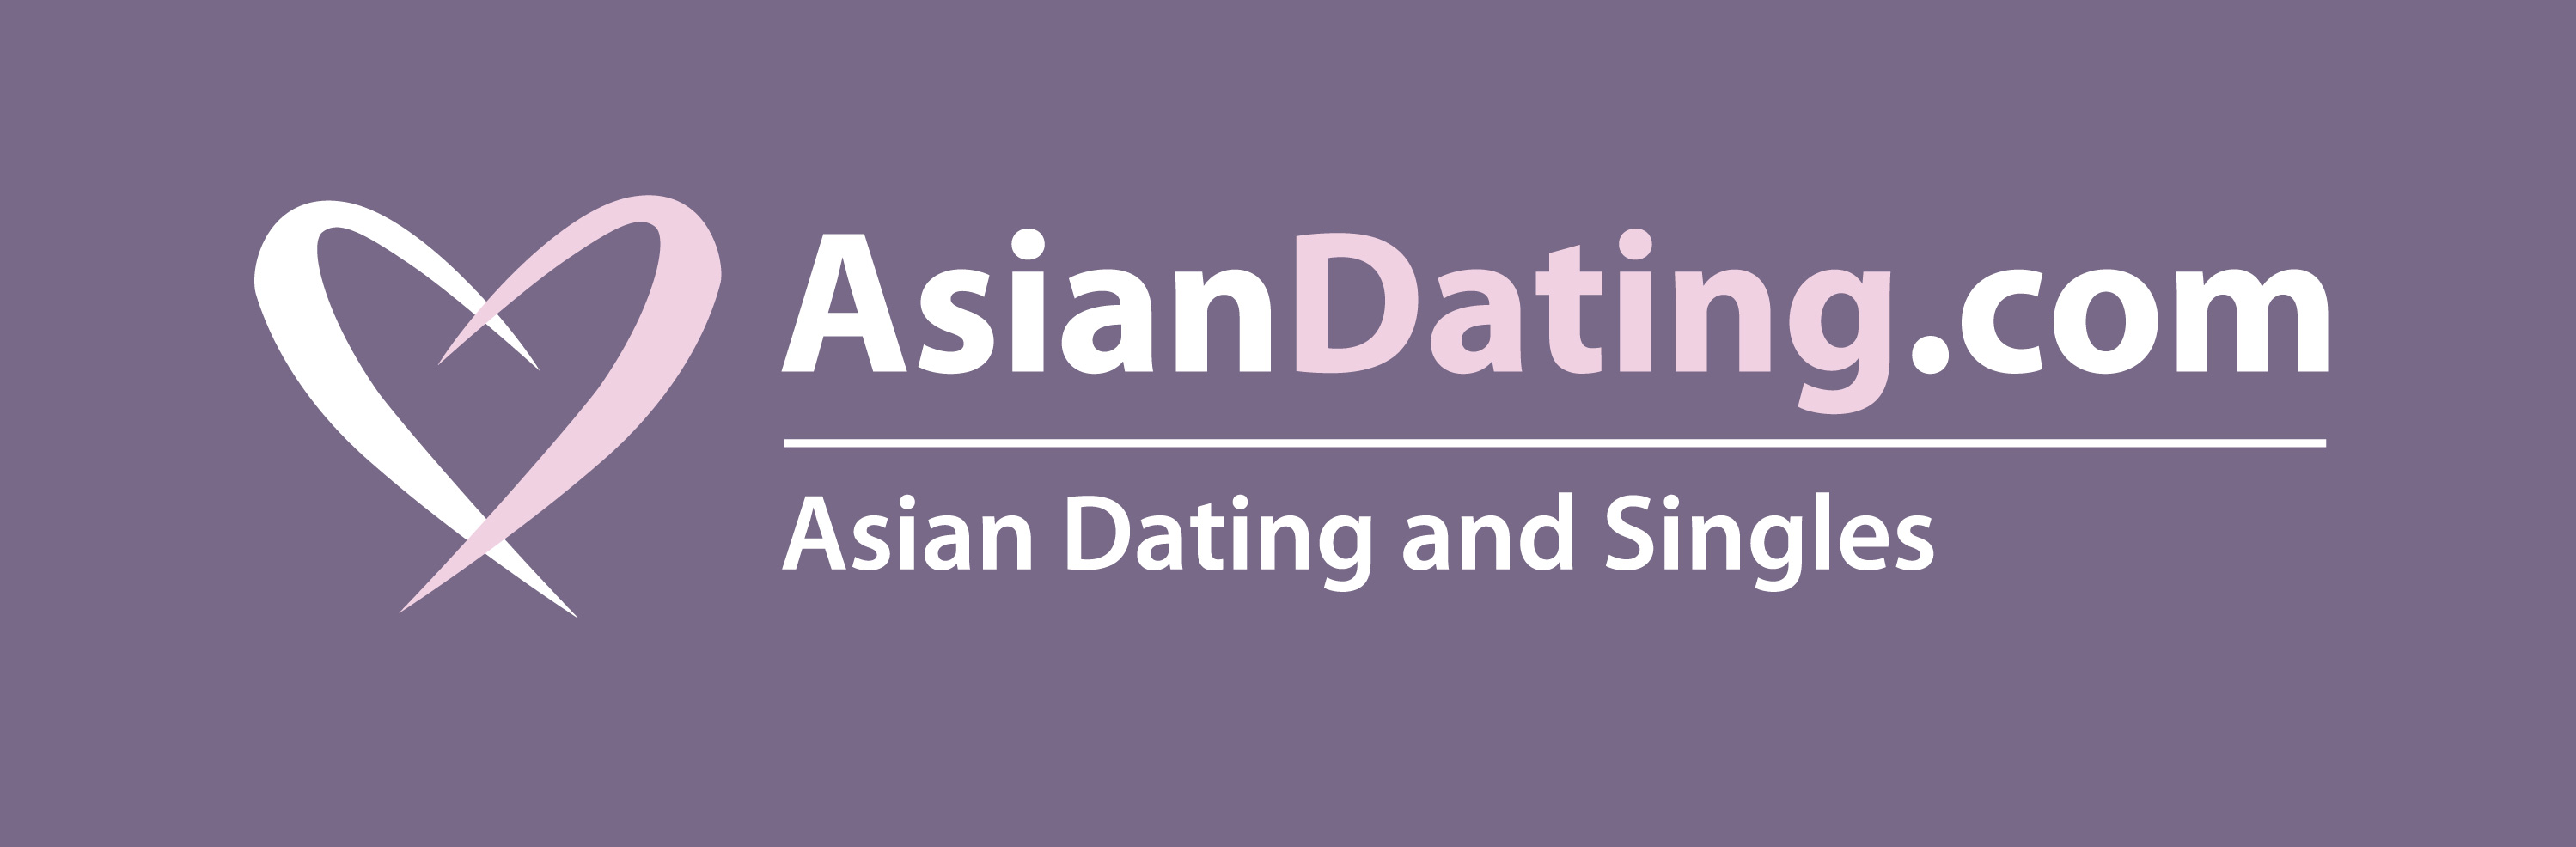 Www asiandating com sign in